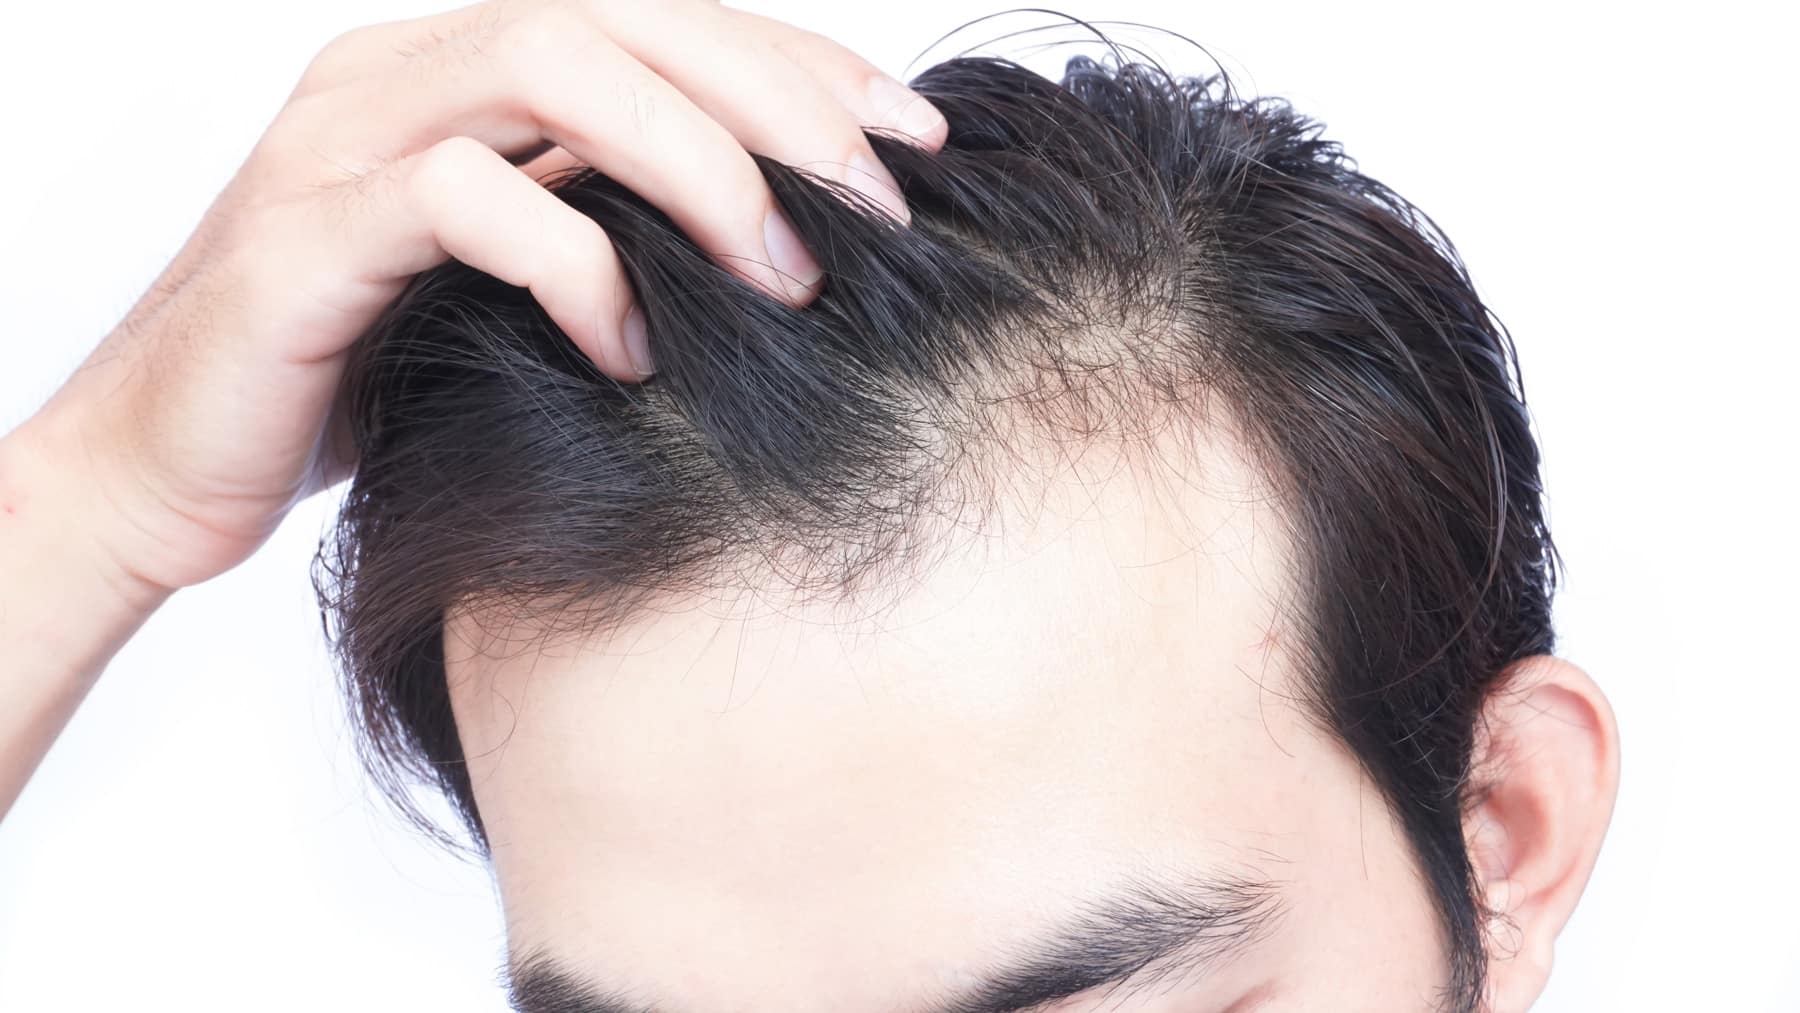 A man is undergoing hair restoration, carefully placing each strand of his own hair back onto his head.